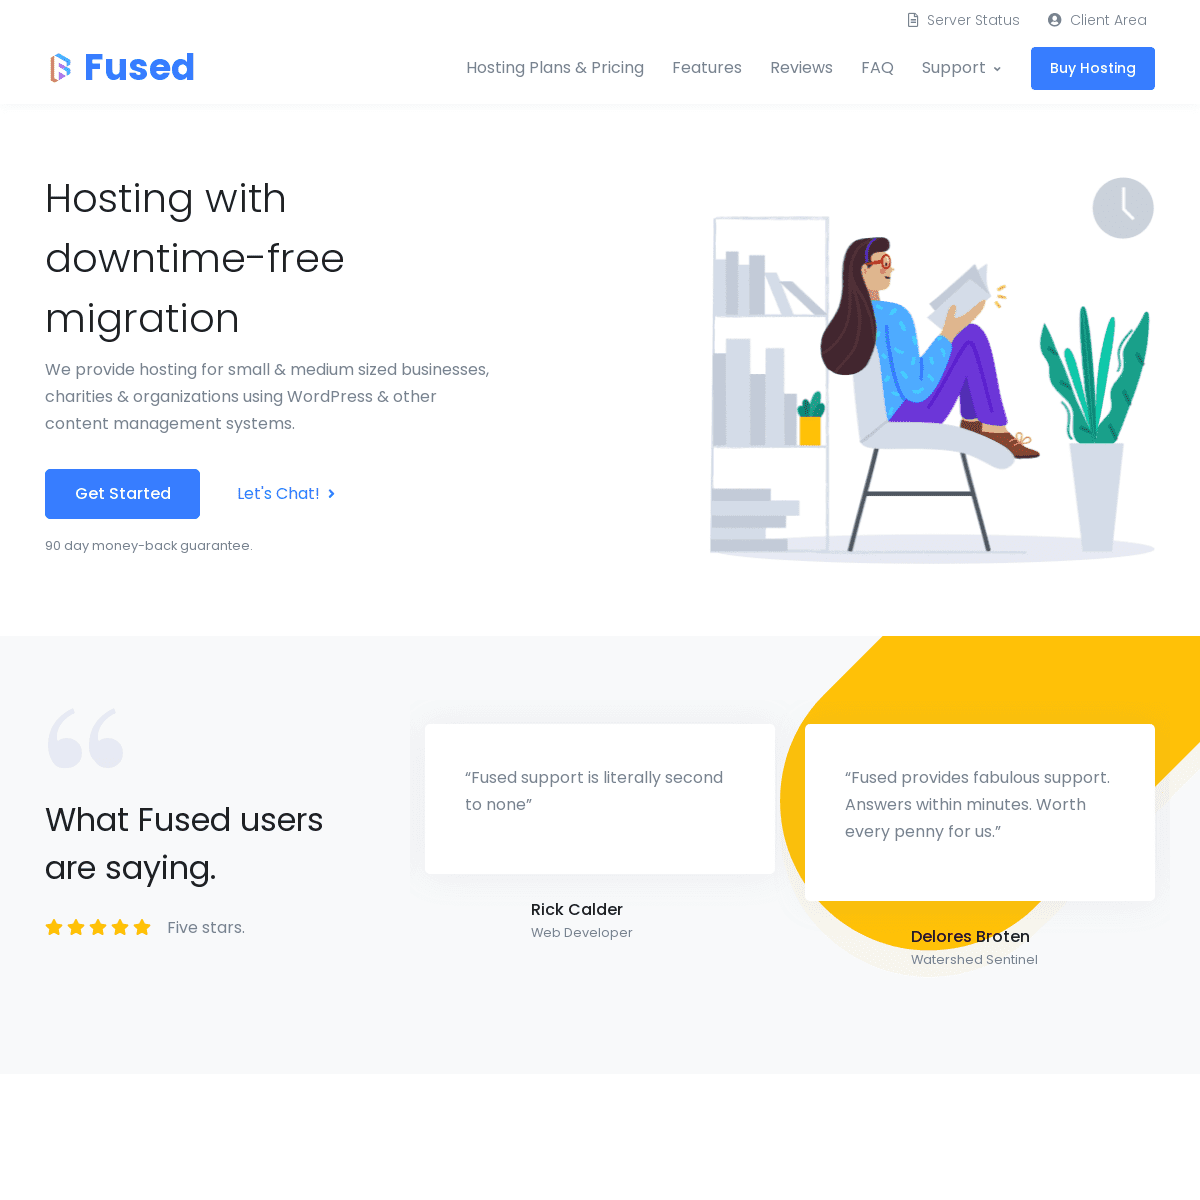 A complete backup of https://fused.com